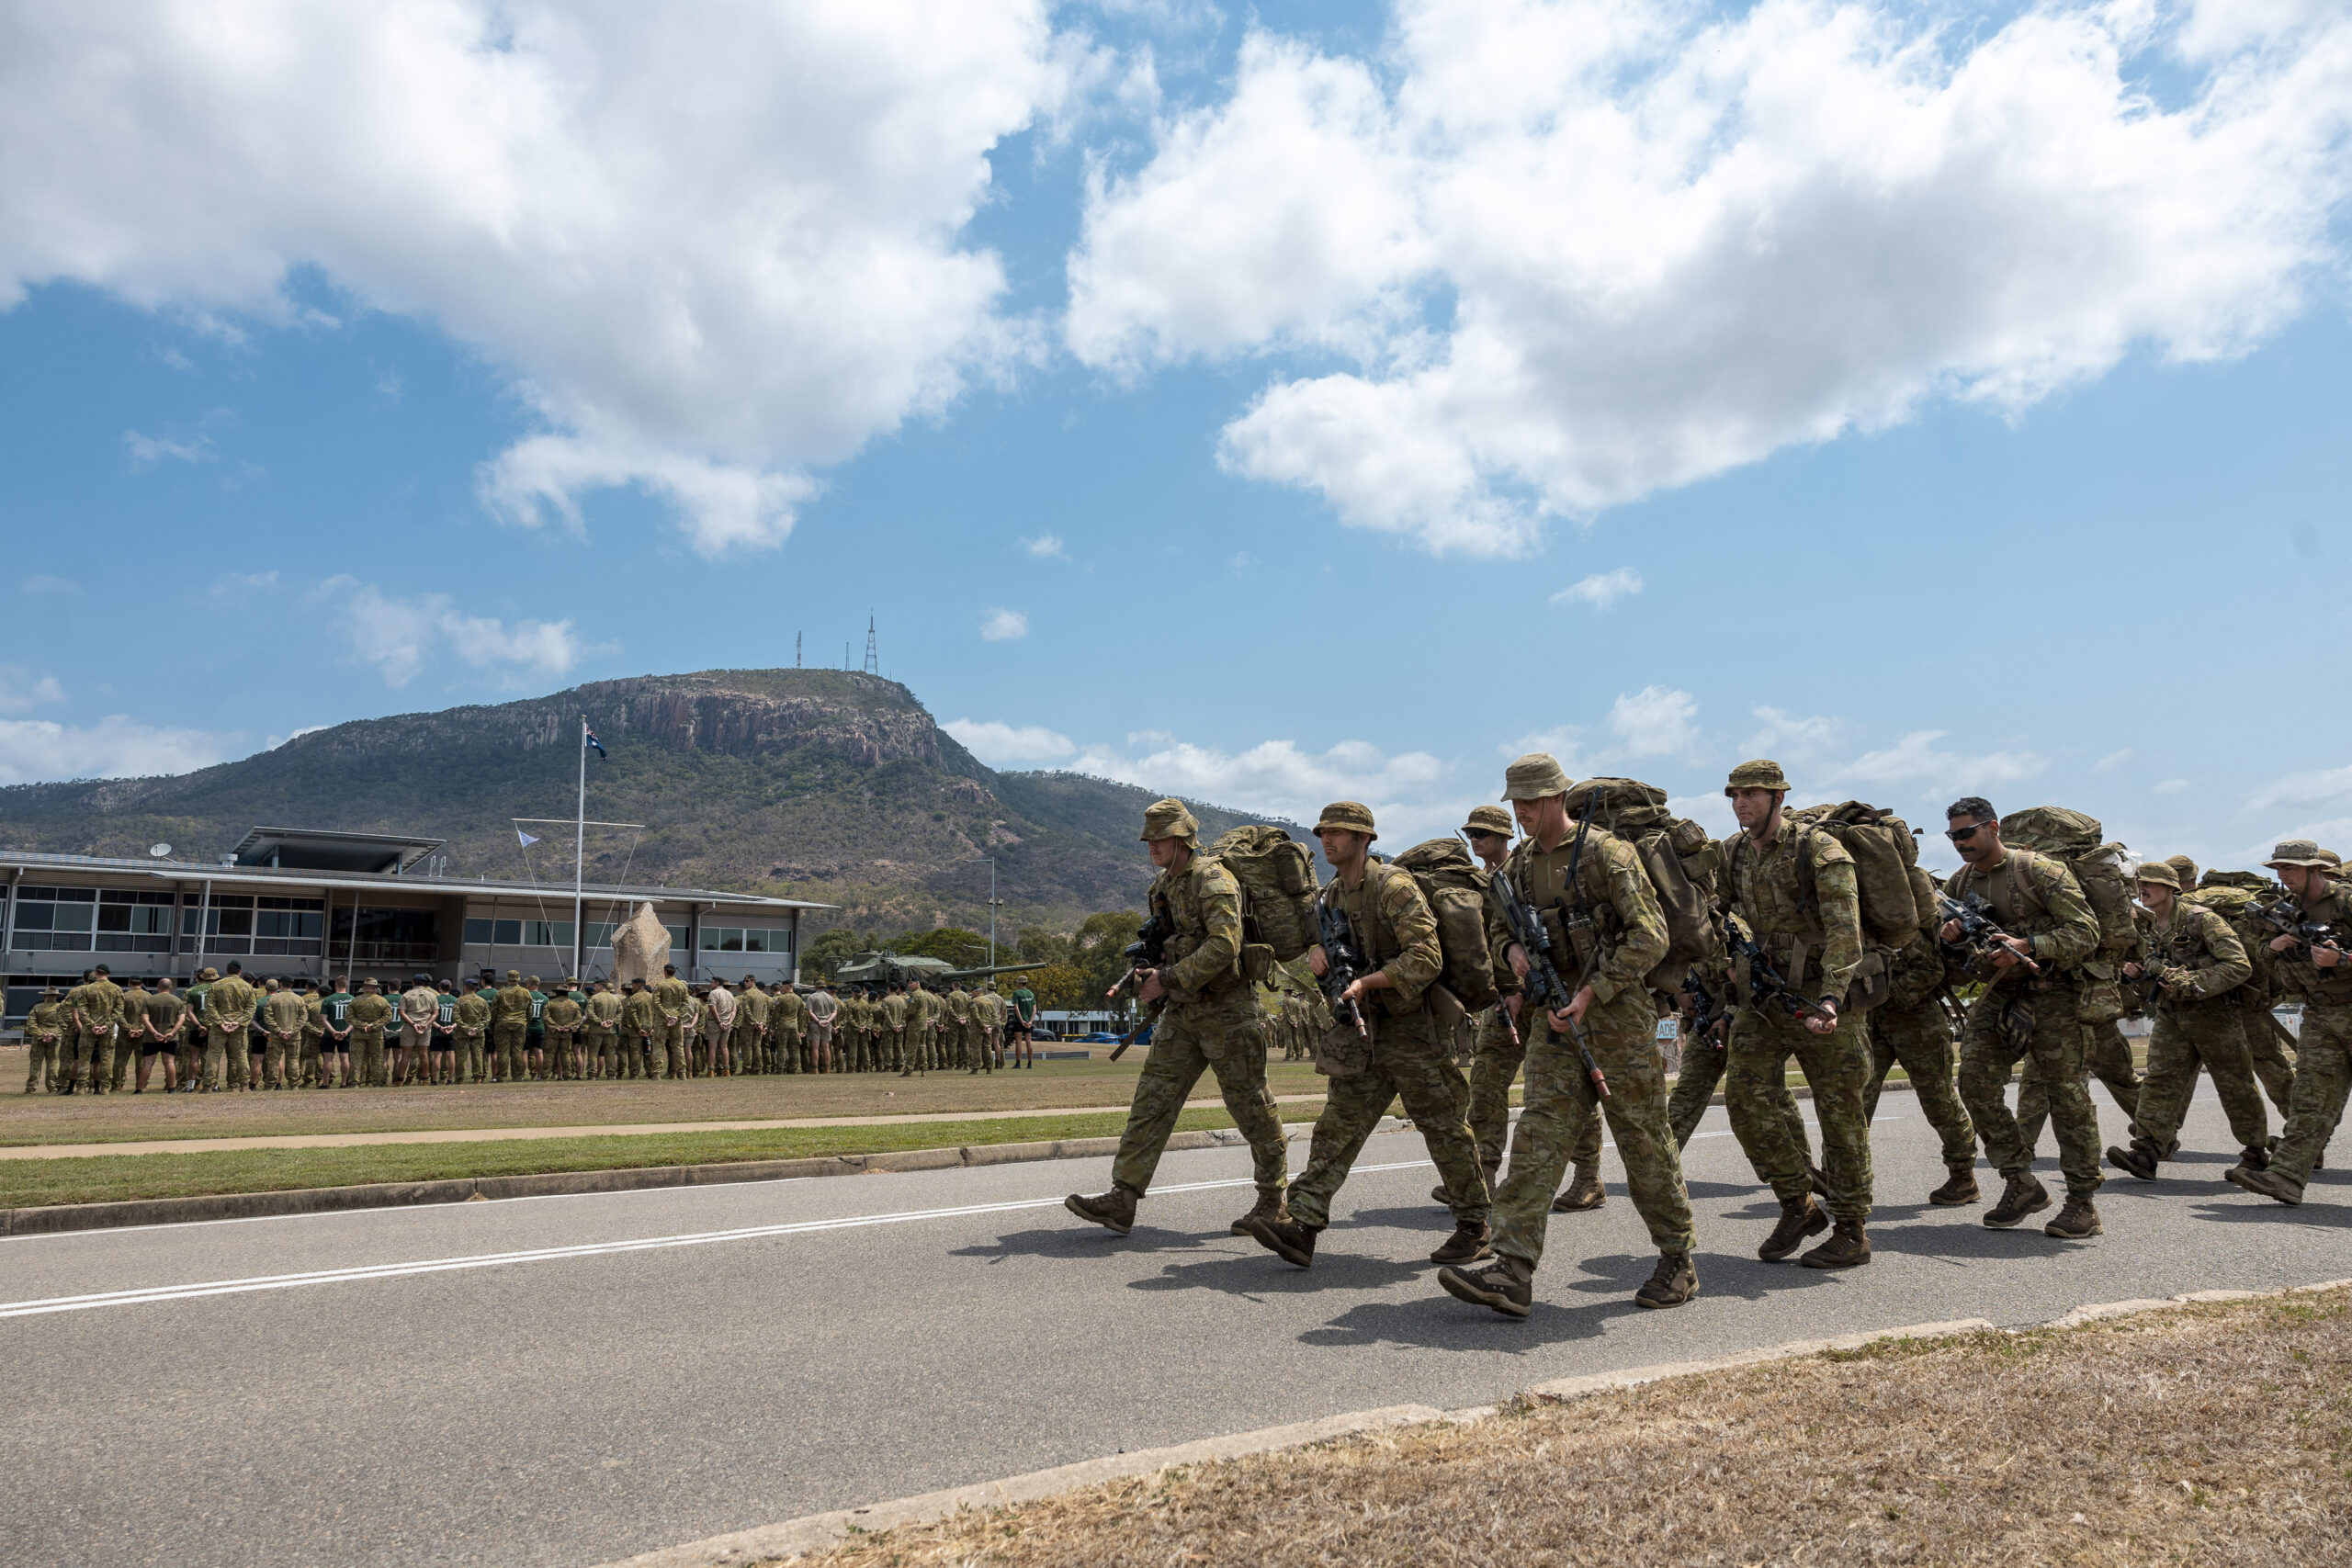 Australian Army soldiers from the 3rd Brigade march towards Brigade Headquarters as part of the 3rd Brigade Section Competition presentation at Lavarack Barracks, Townsville, Queensland. *** Local Caption *** The 3rd Brigade Section Competition was held at Lavarack Barracks, Mount Stuart Training Area and Tully Training Area, QLD, between 17-19 Oct 2023. The competition involved eight sections from within the Brigade testing themselves over a series of military skills stands. Stands included the obstacle course, marksmanship serials, casualty evacuation medical training, military flotation, section attack, section defence, communications, navigation, obstacle deduction and all arms call for fire with artillery assets.